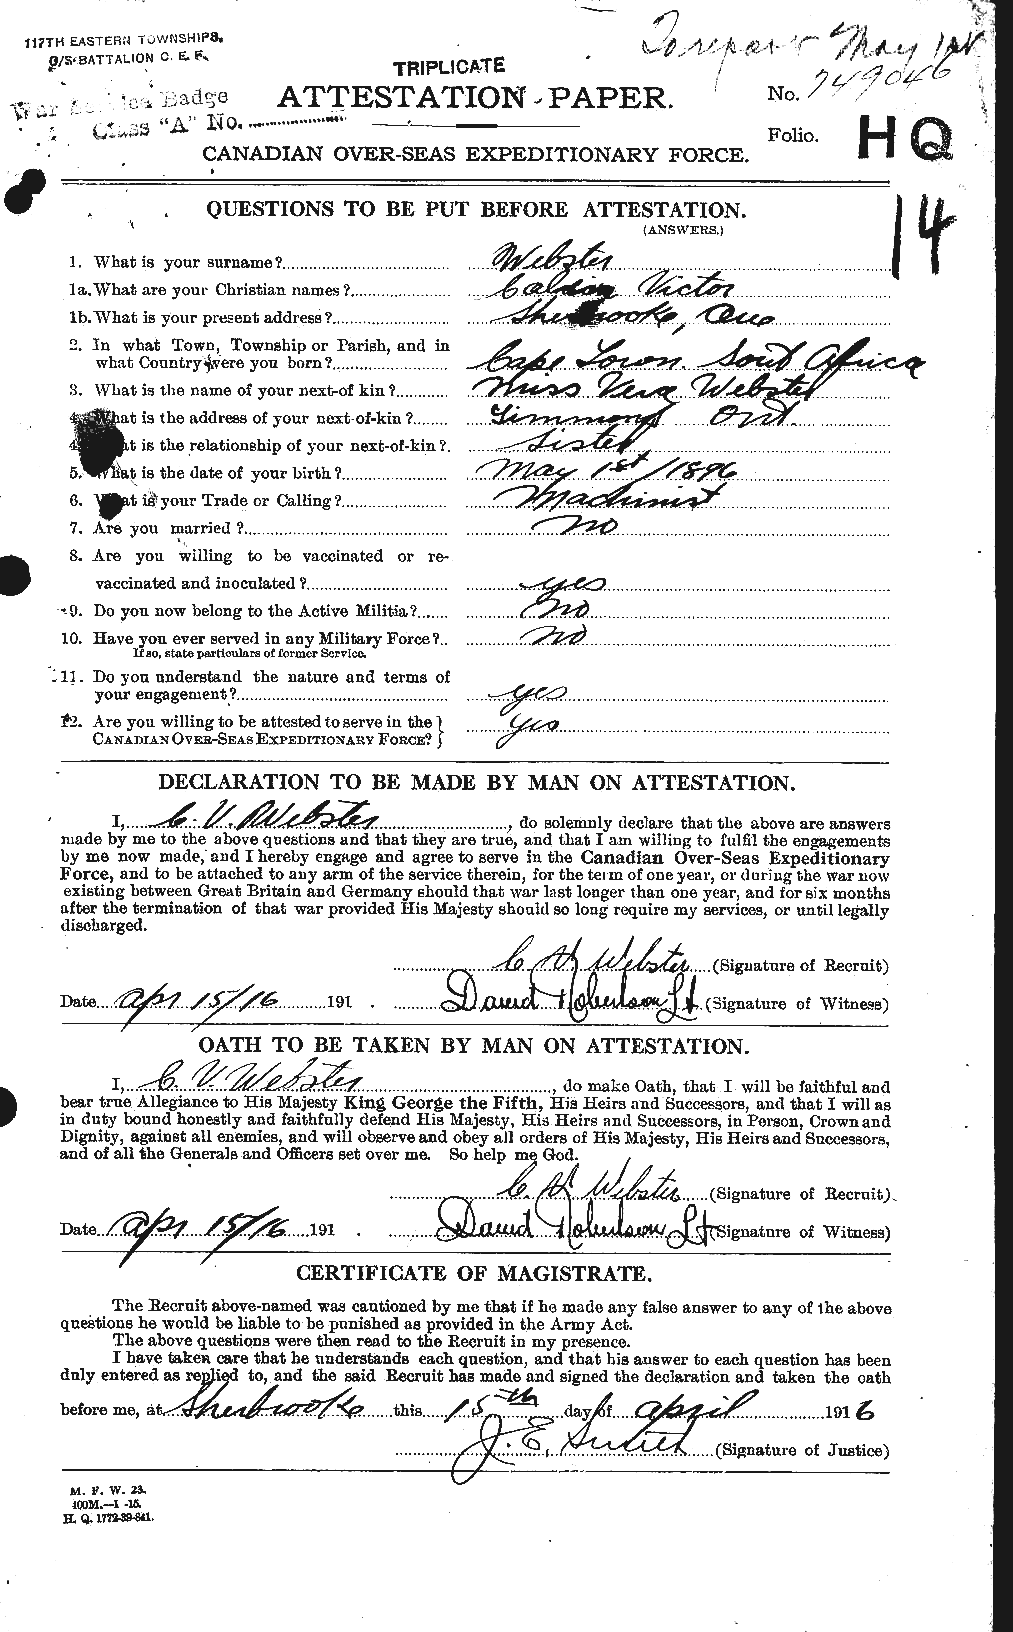 Personnel Records of the First World War - CEF 670308a